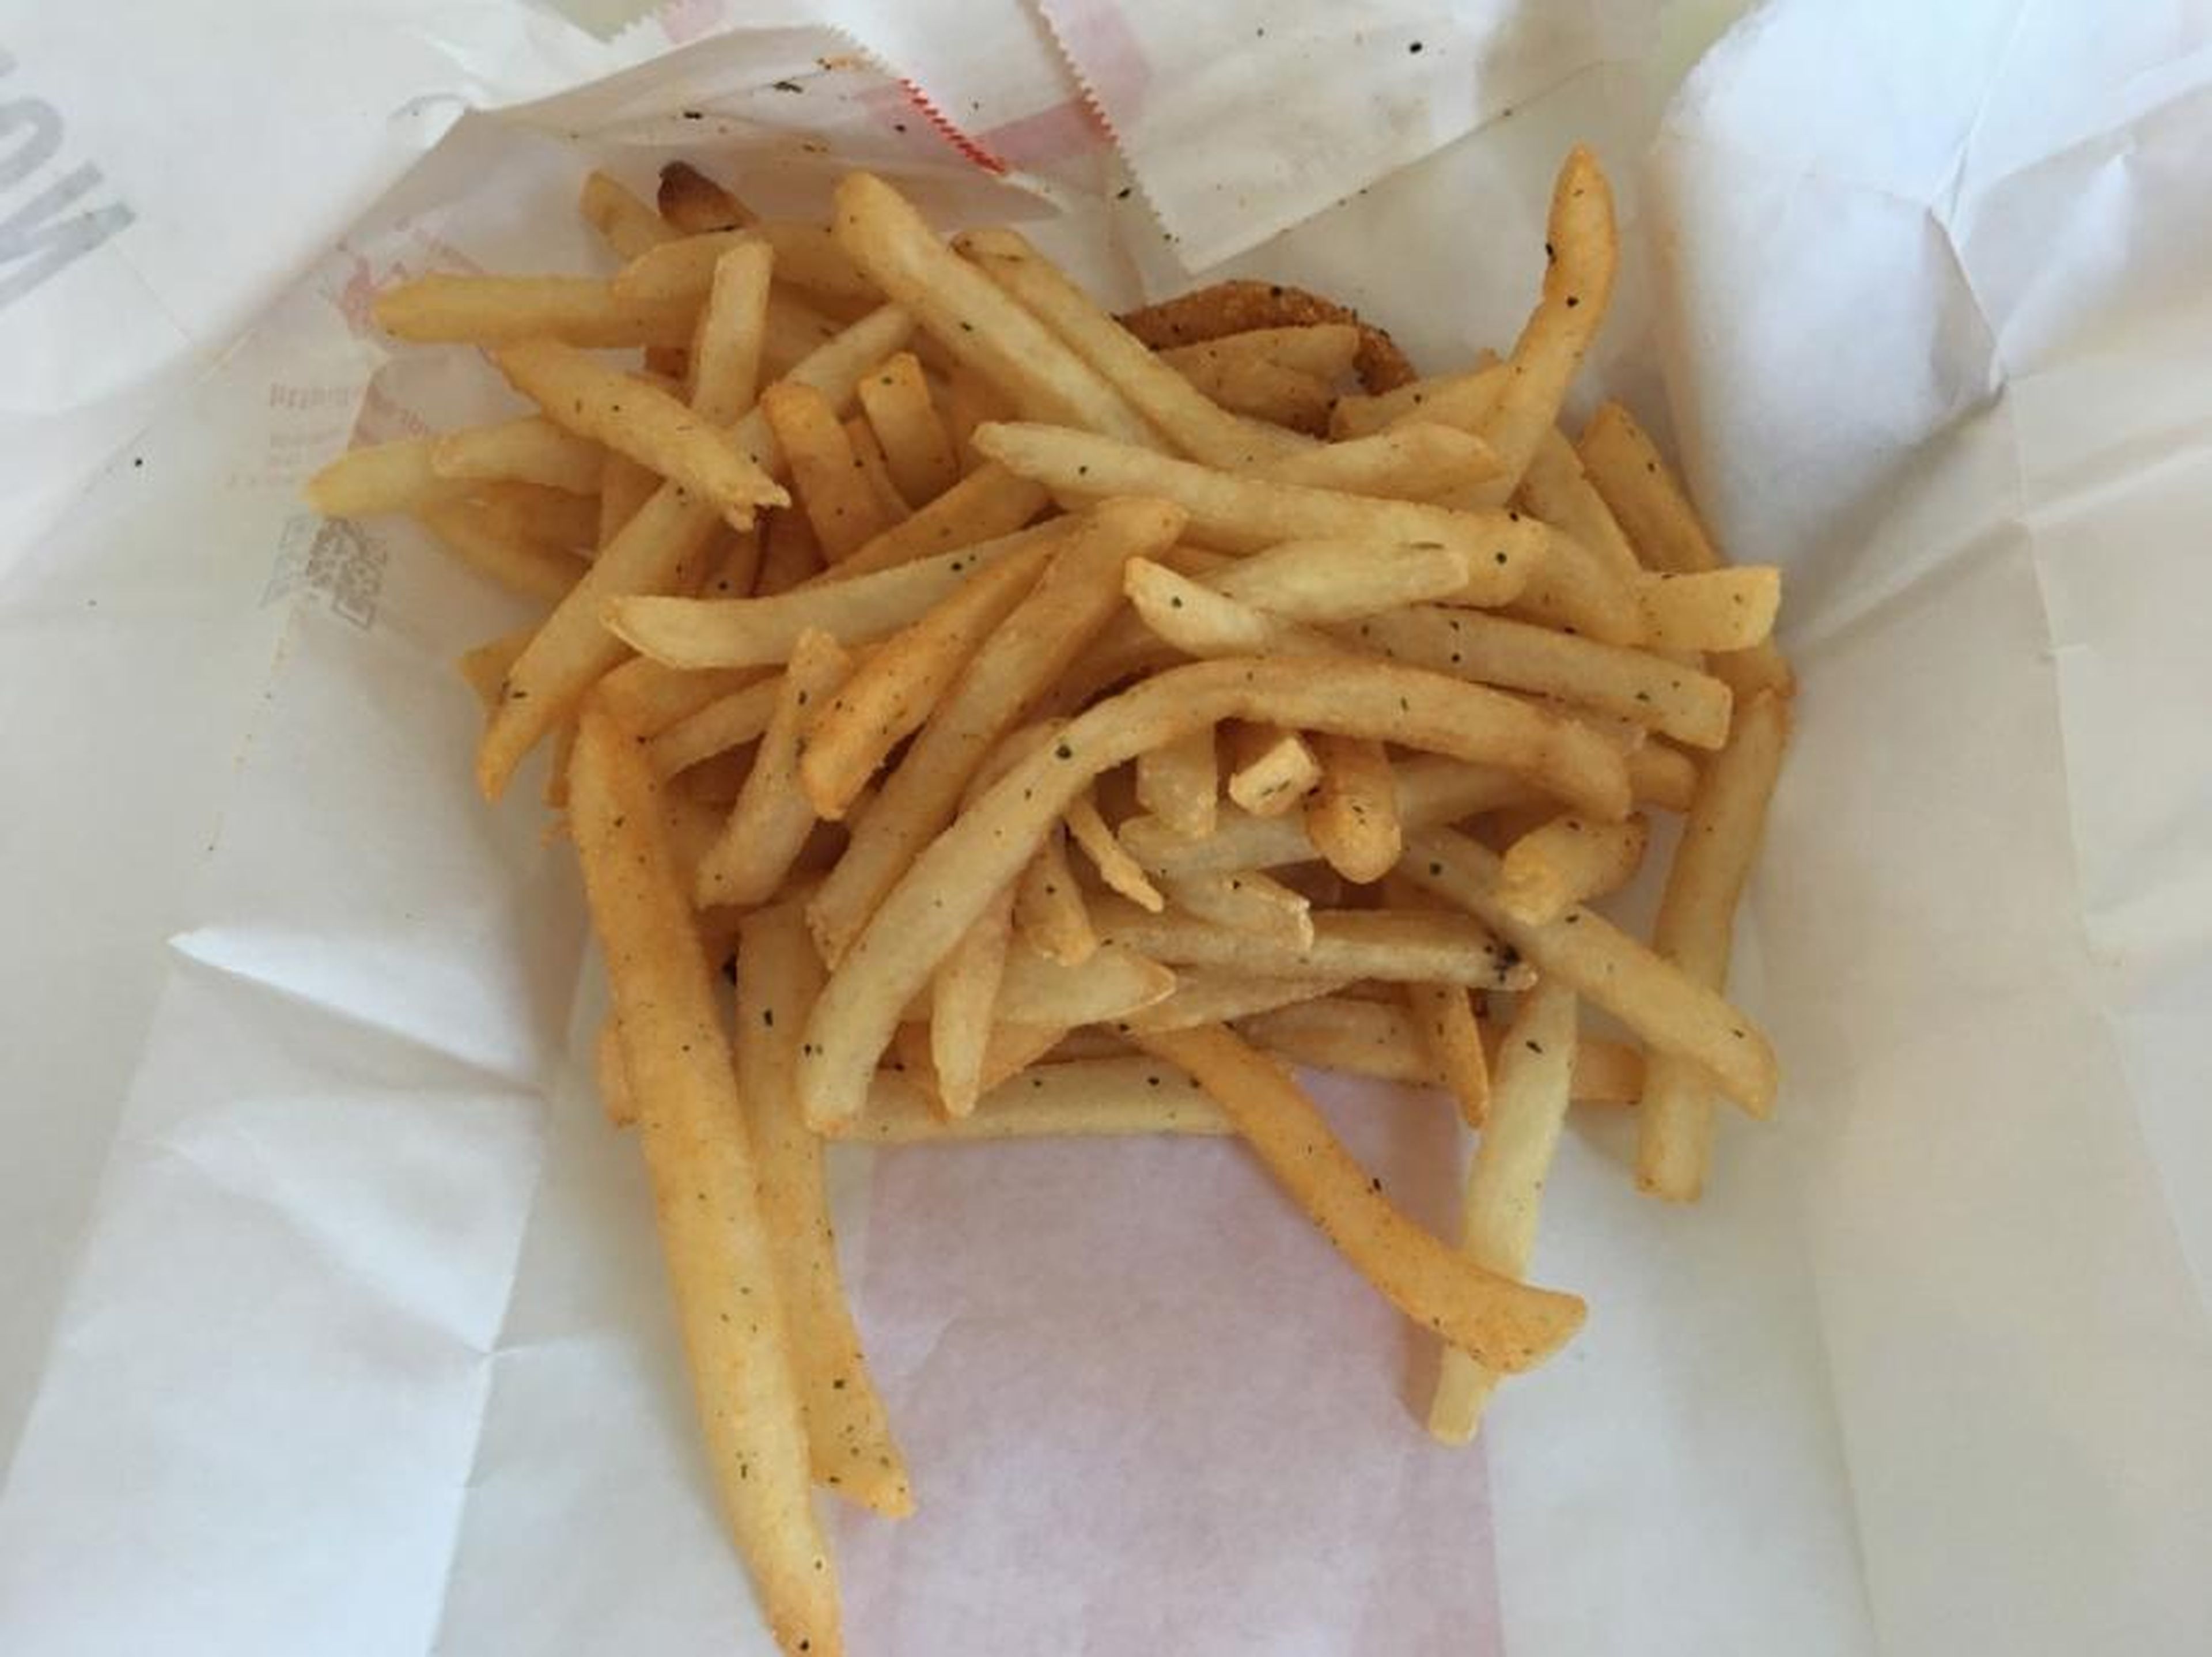 We upgraded our French fries to "Mentai-mayo fries," and a mentai-mayo-flavored powder was put in a paper bag to shake the fries.